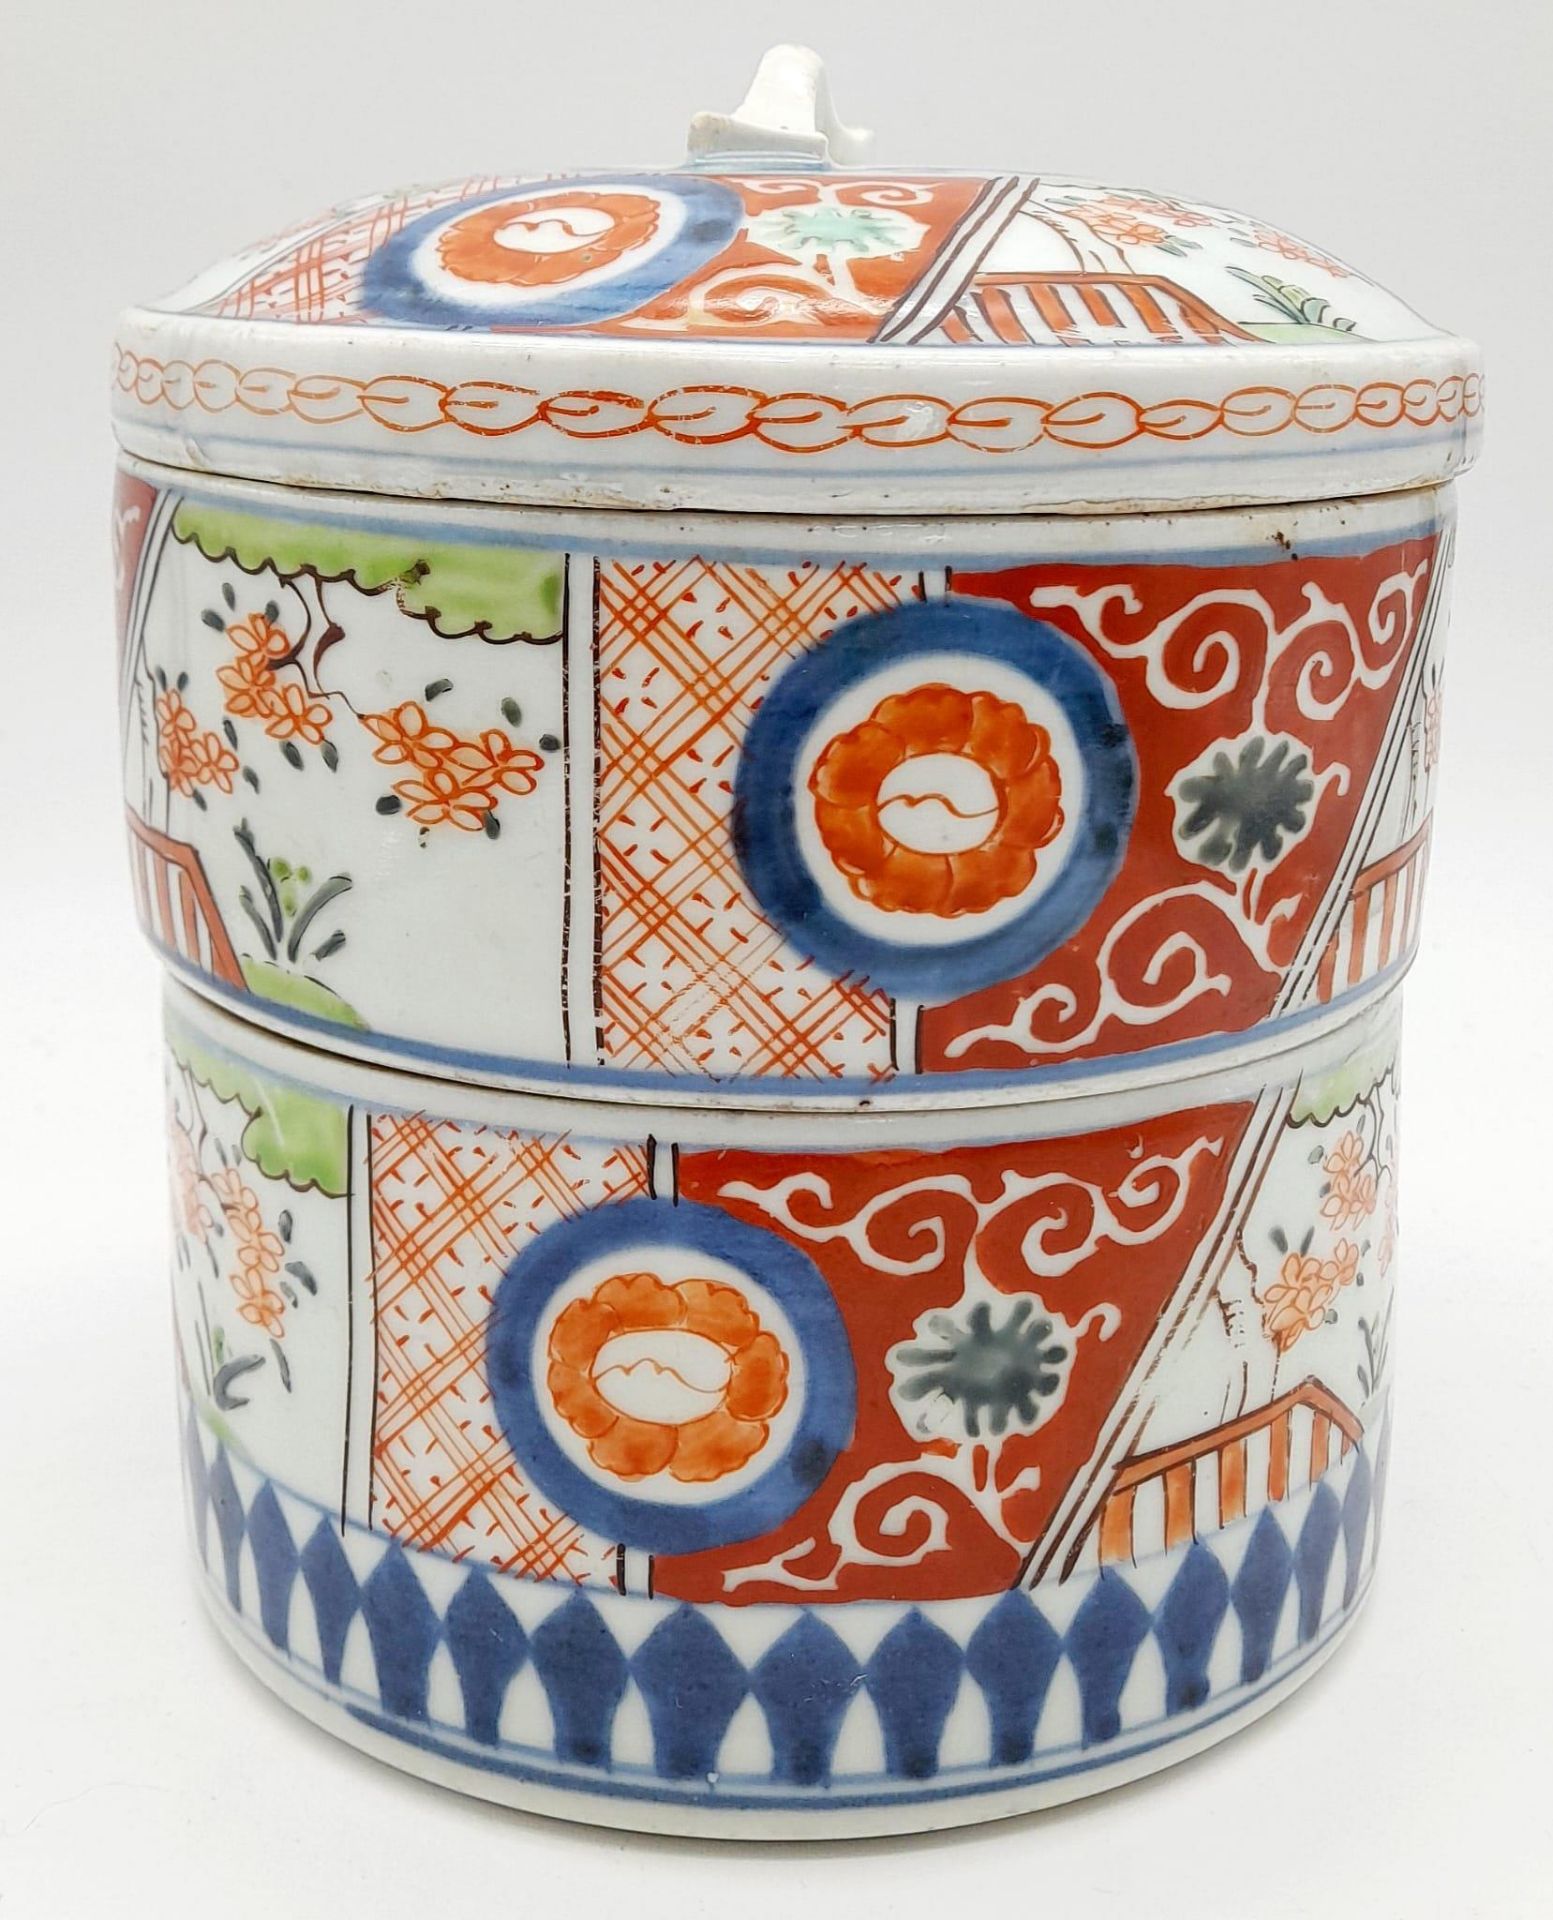 A Superb Antique (Mid 19th century) Japanese Double Tier Box with Lid. Wonderful colours in the - Image 3 of 7